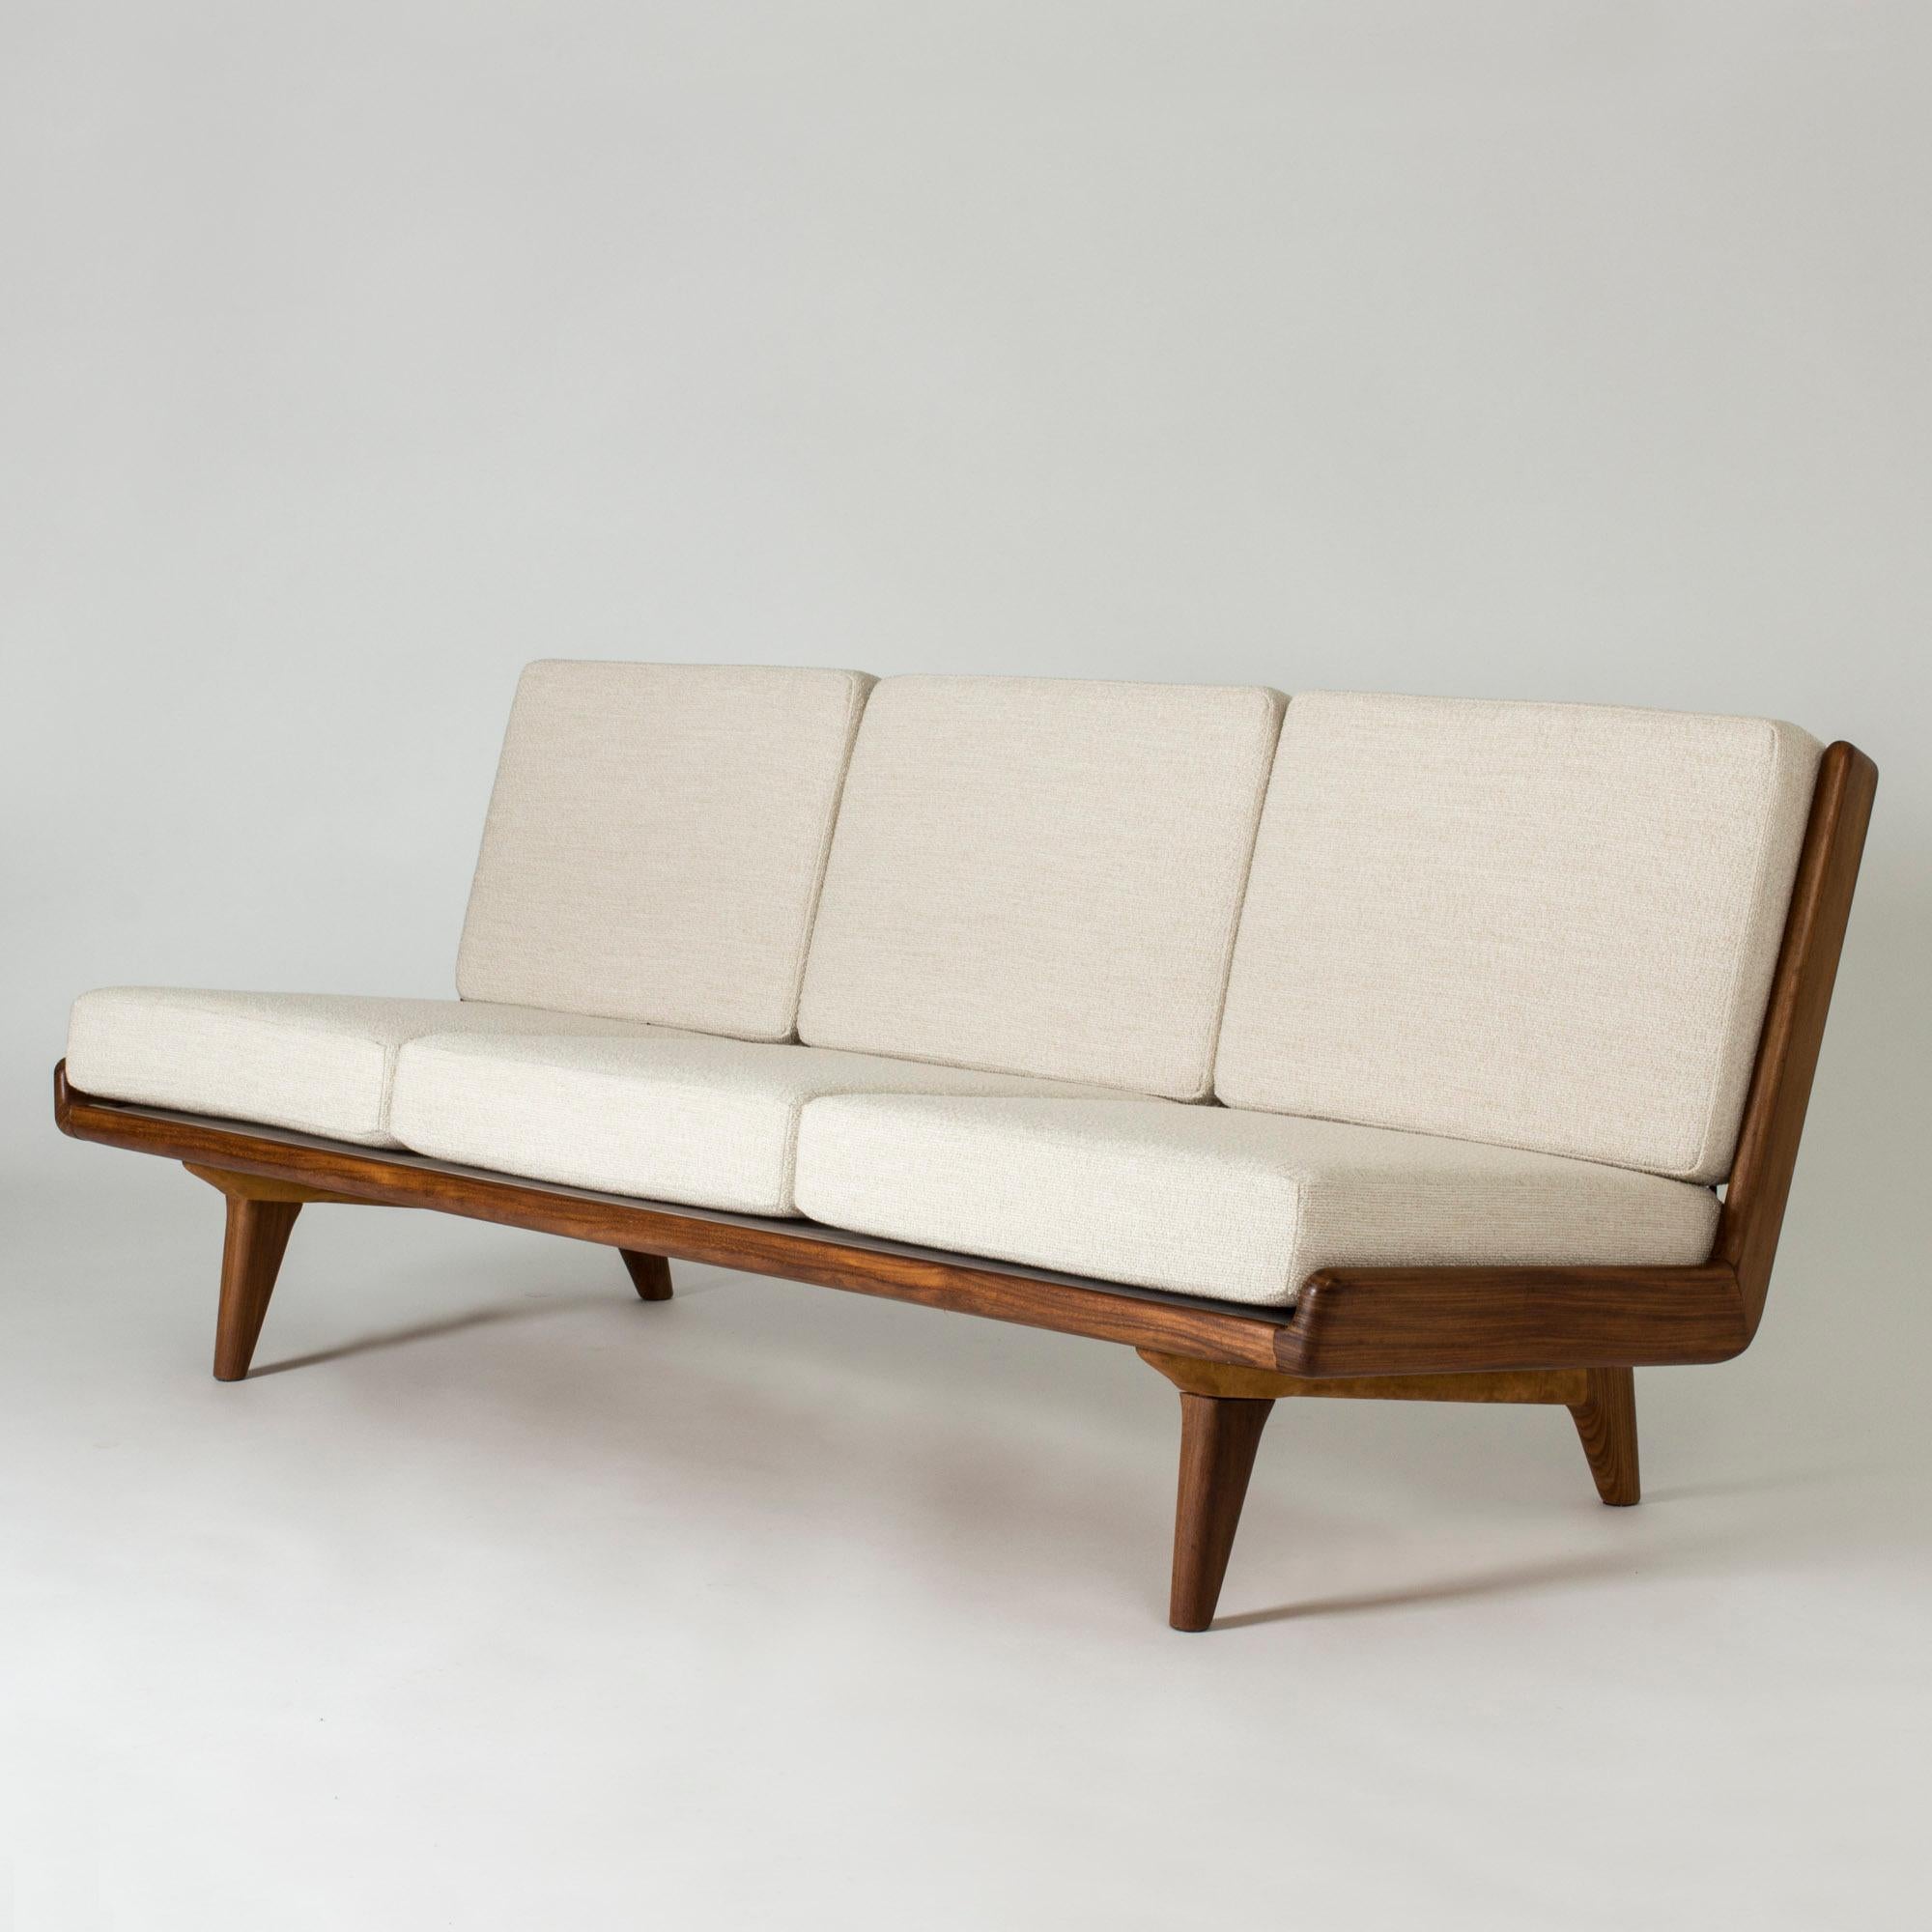 Sofa by Gustaf Hiort af Ornäs, made from walnut with sculptural details. The amazing leather webbing backrest makes this sofa a real room jewel. Seat upholstered in cream fabric.